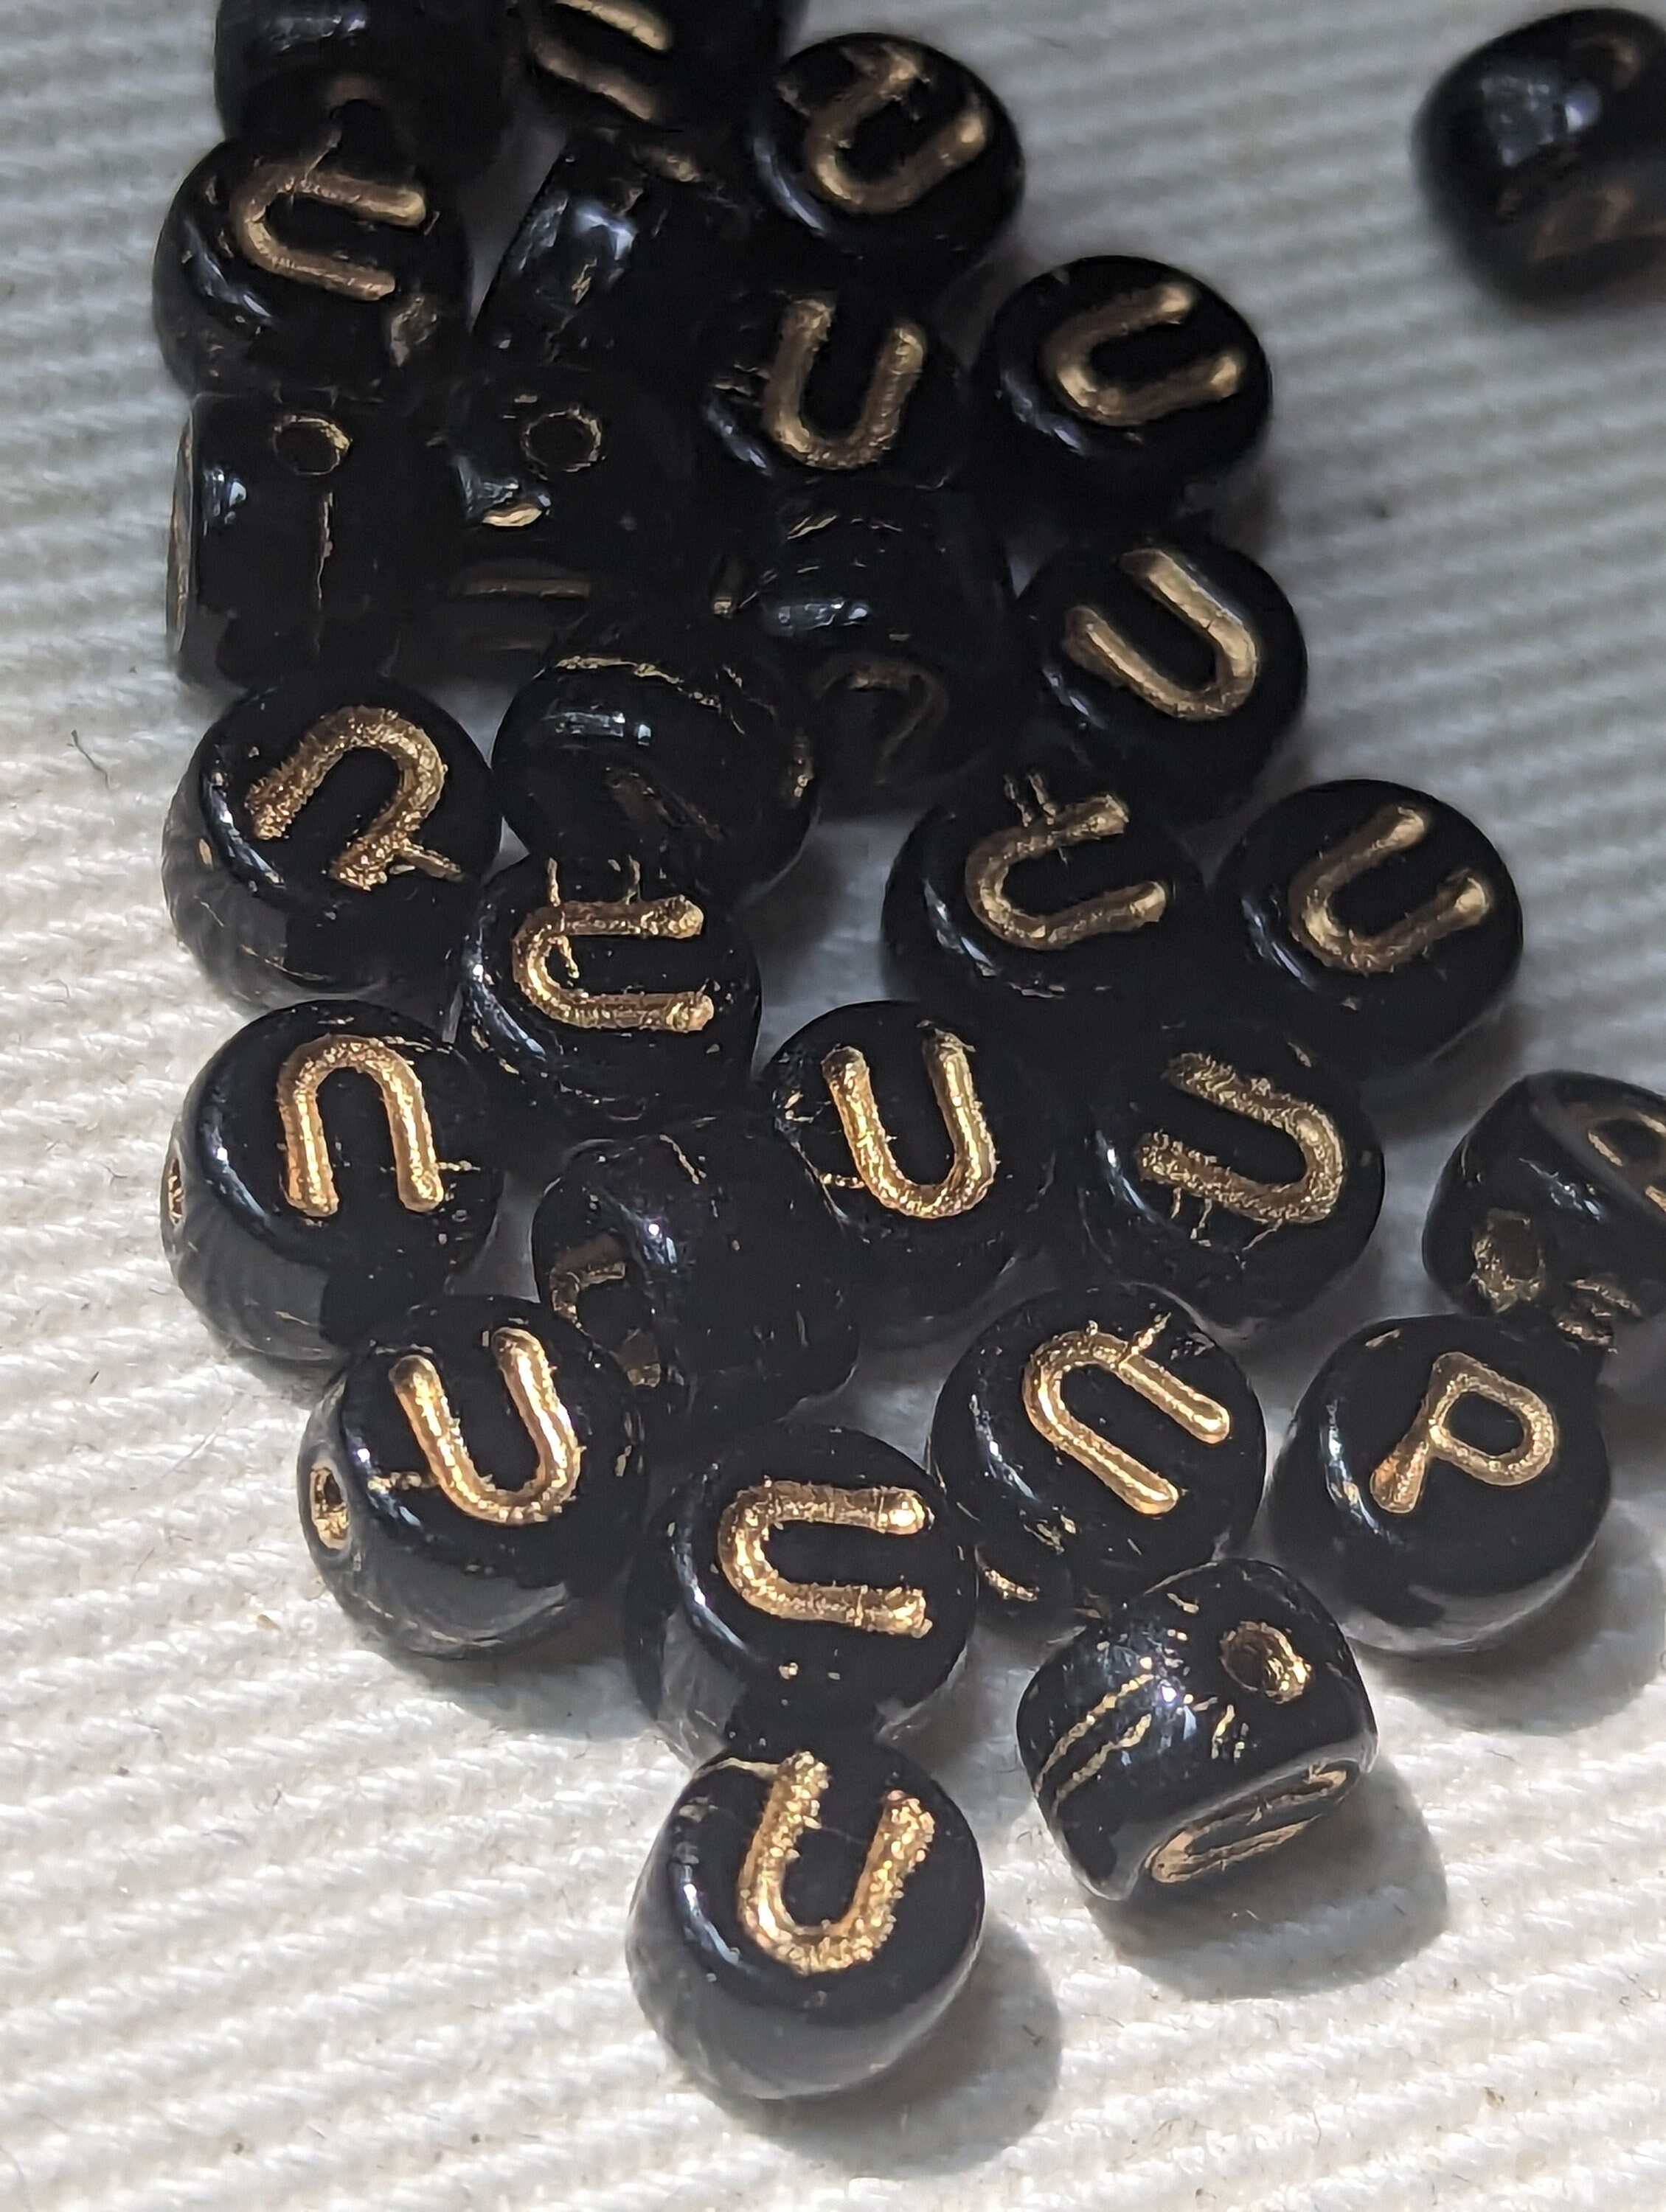 Alphabet Letter Beads, 7mm Gold Metallic Round Acrylic Beads with Black  Lettering, ABC Name Beads, A-Z Letter Beads, Rosegold Love Beads